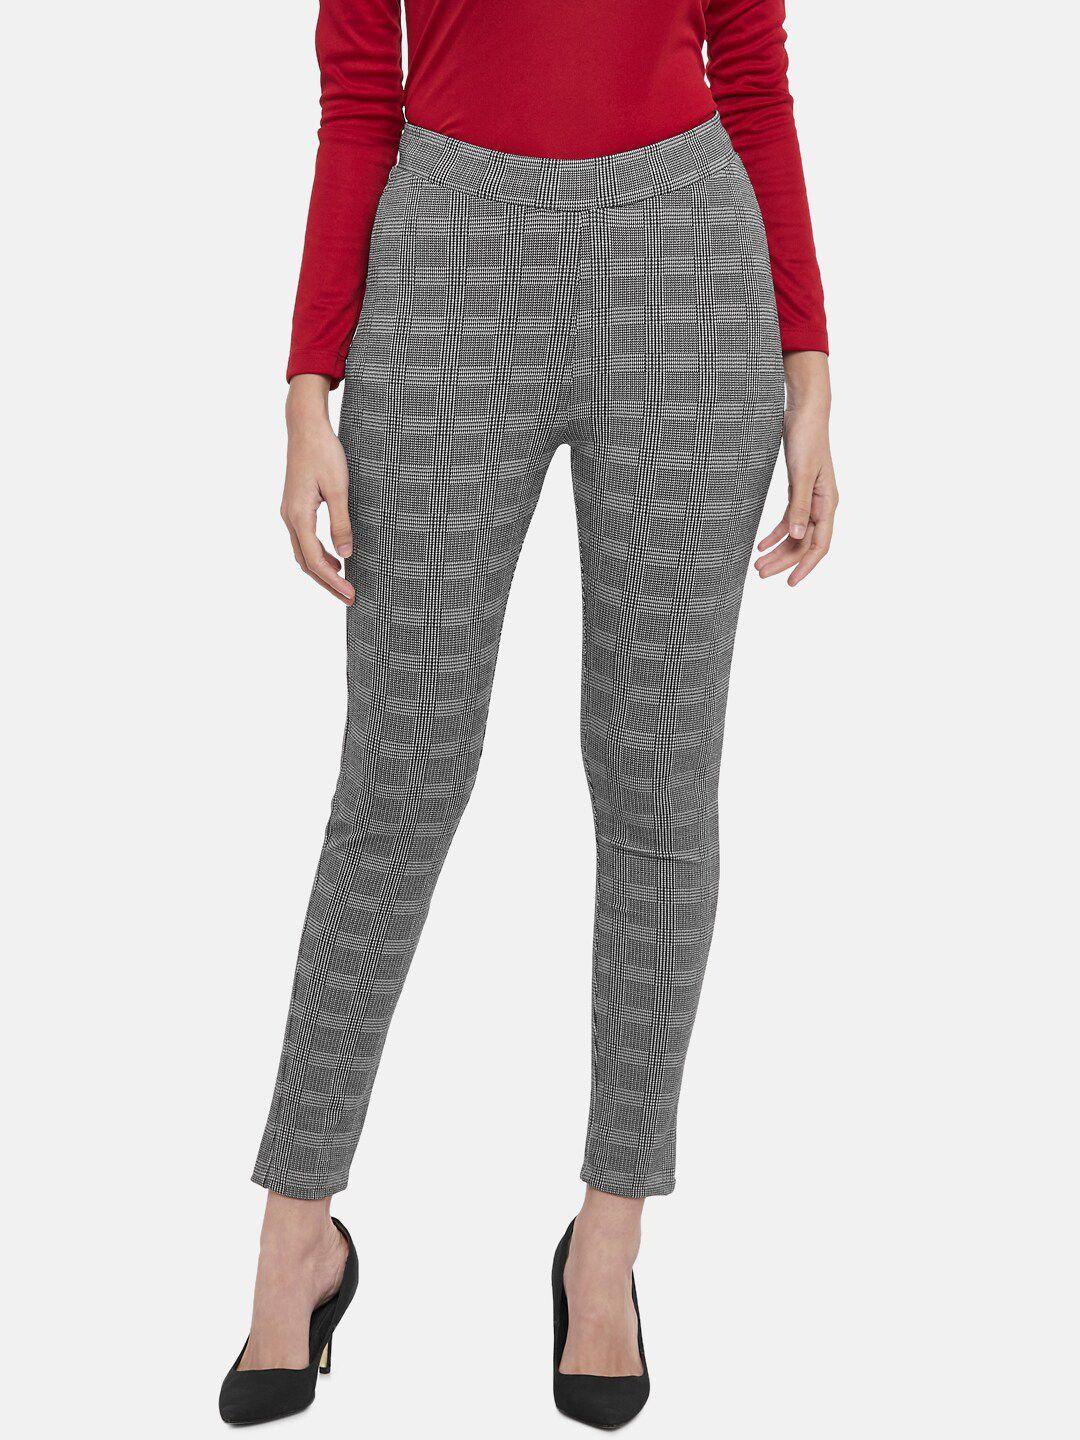 Annabelle by Pantaloons Women Grey & White Checked Slim-Fit Treggings